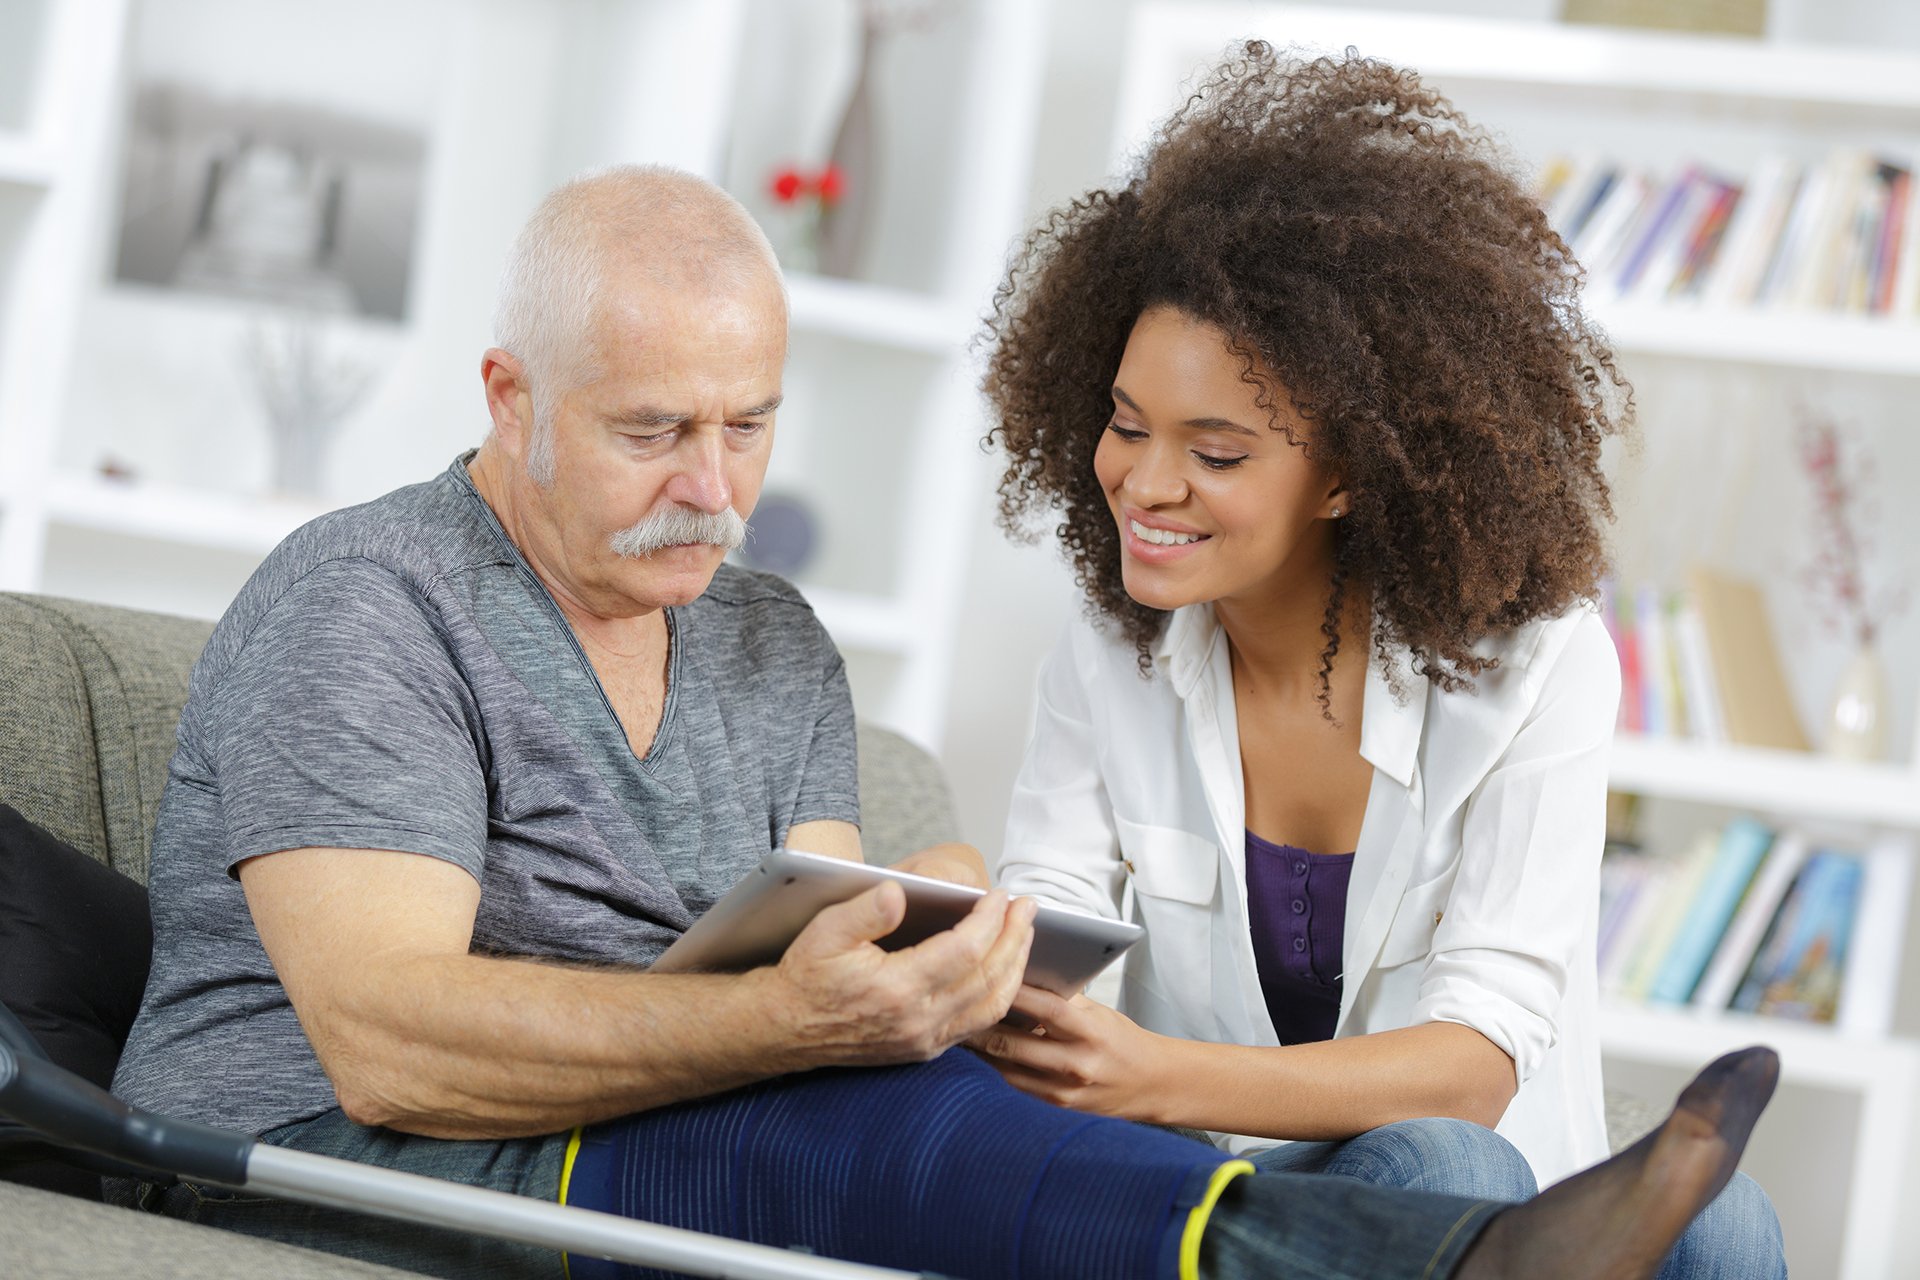 Woman care manager sharing ipad with elderly man